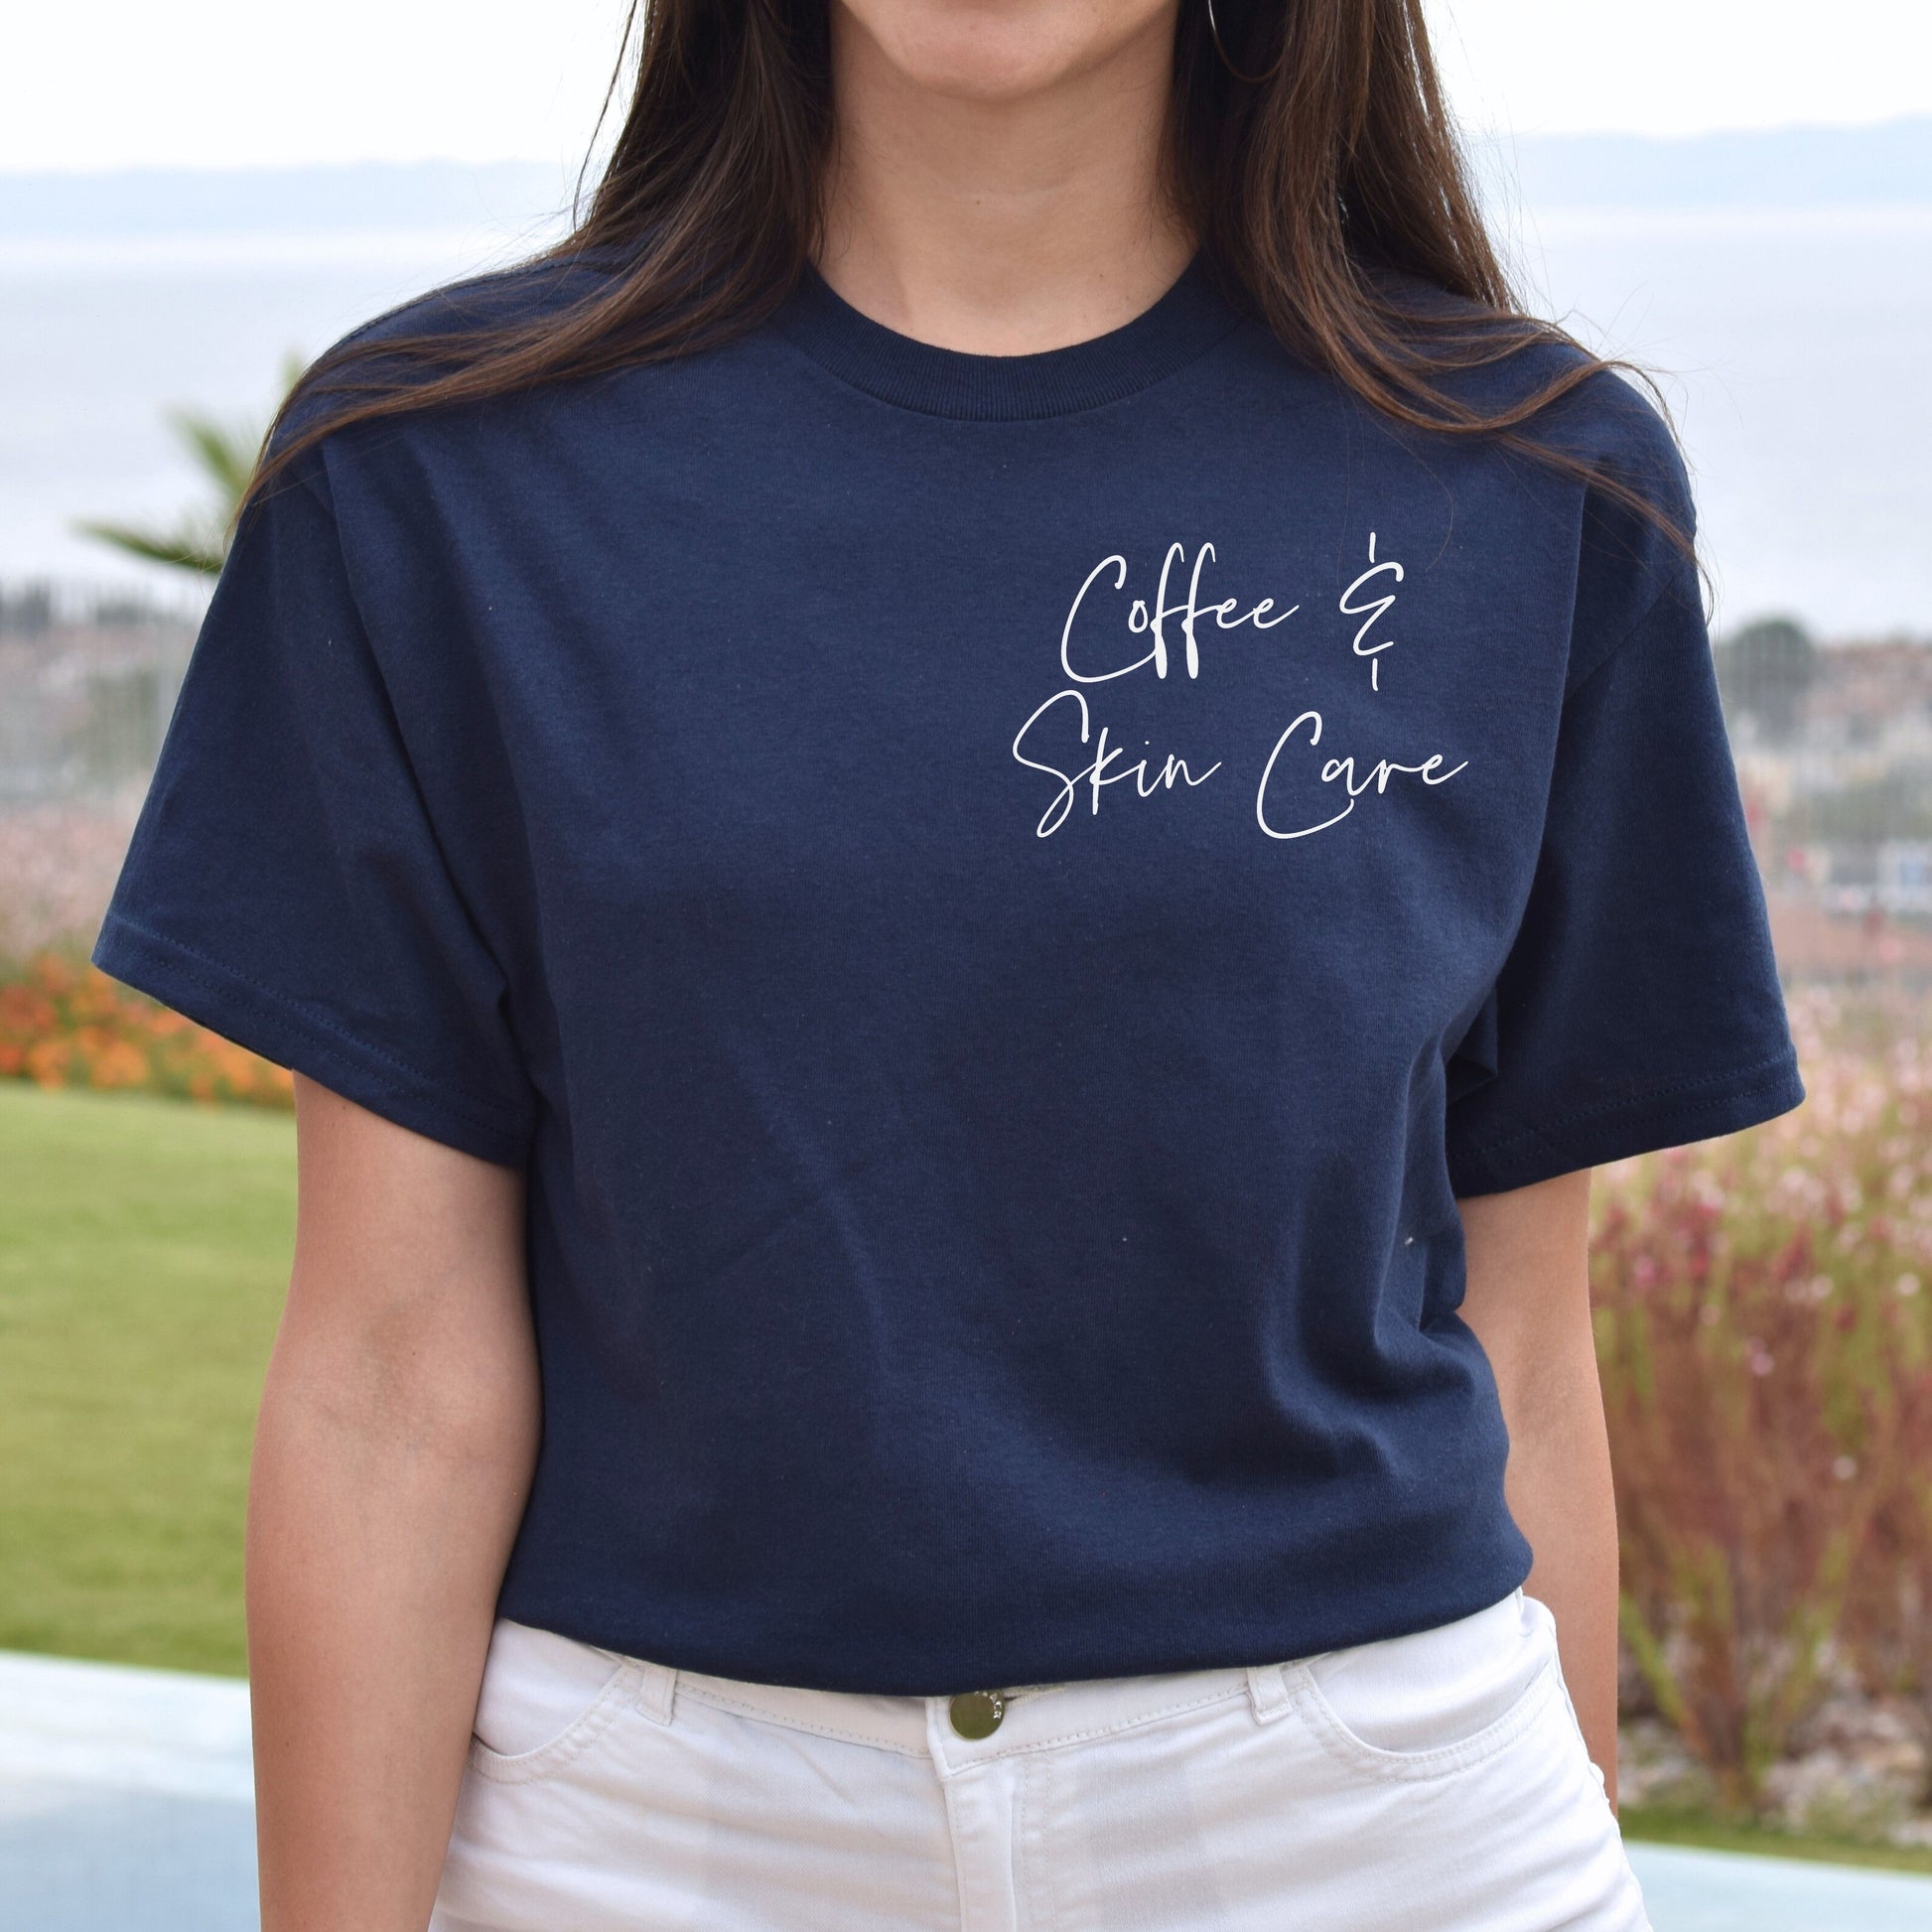 Coffee and skin care pocket Unisex T-shirt Esthetician tee Black Navy Dark Heather-Navy-Family-Gift-Planet